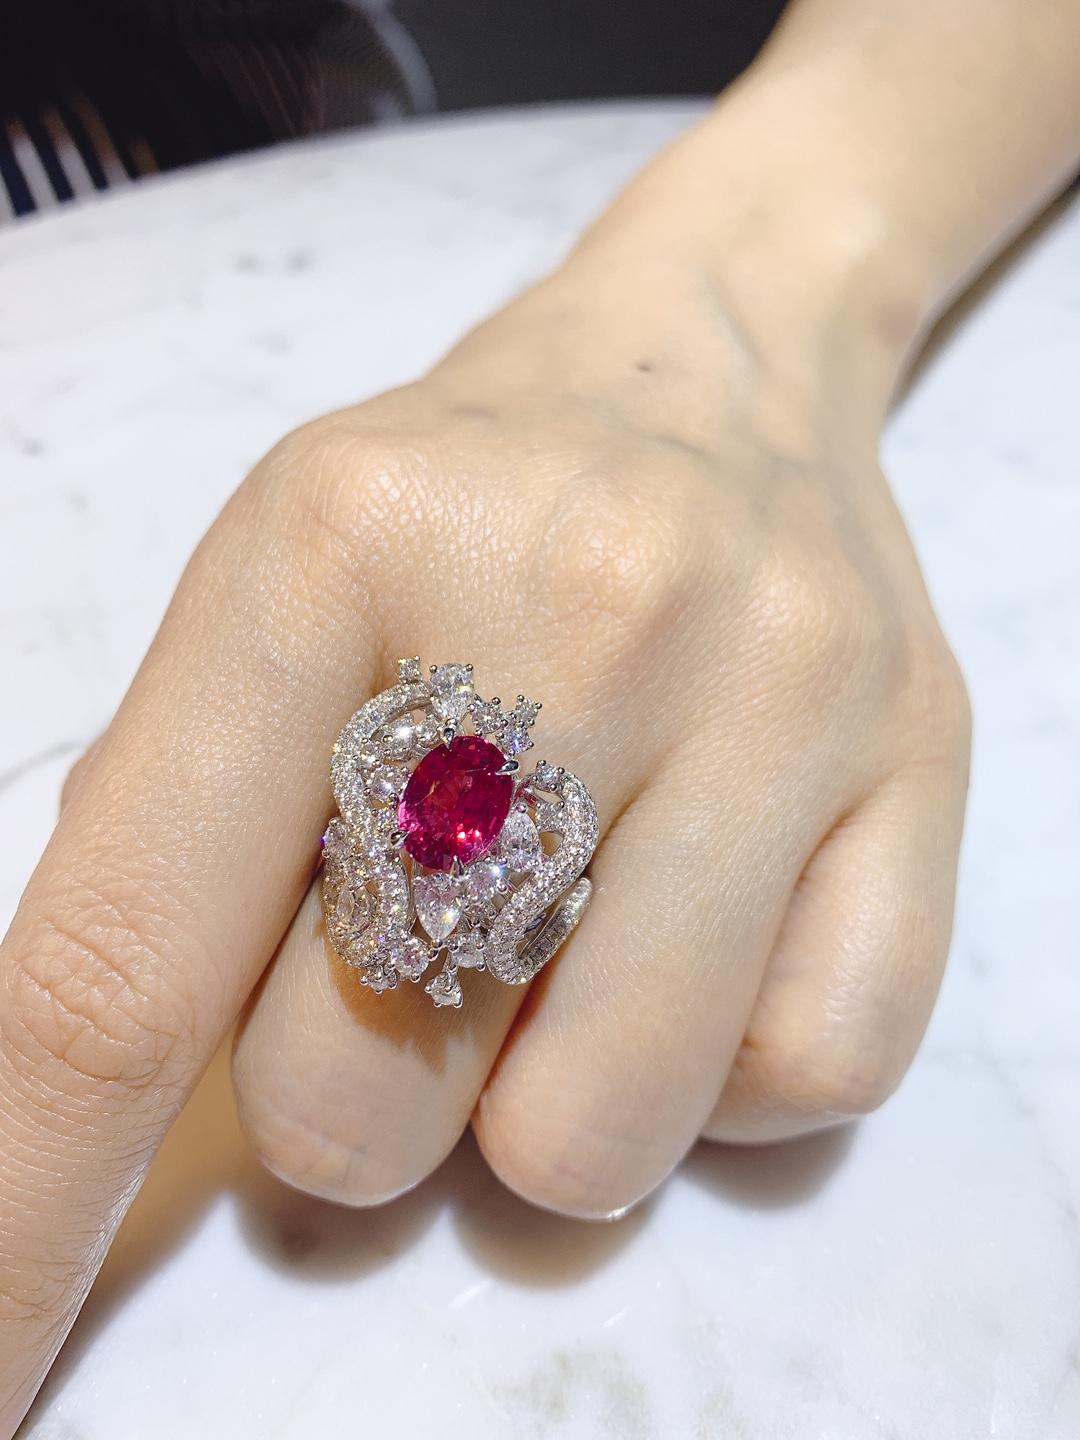 GRS Certified 3.6 Carat Unheated Pink Sapphire Ring from Sri Lanka For Sale 1